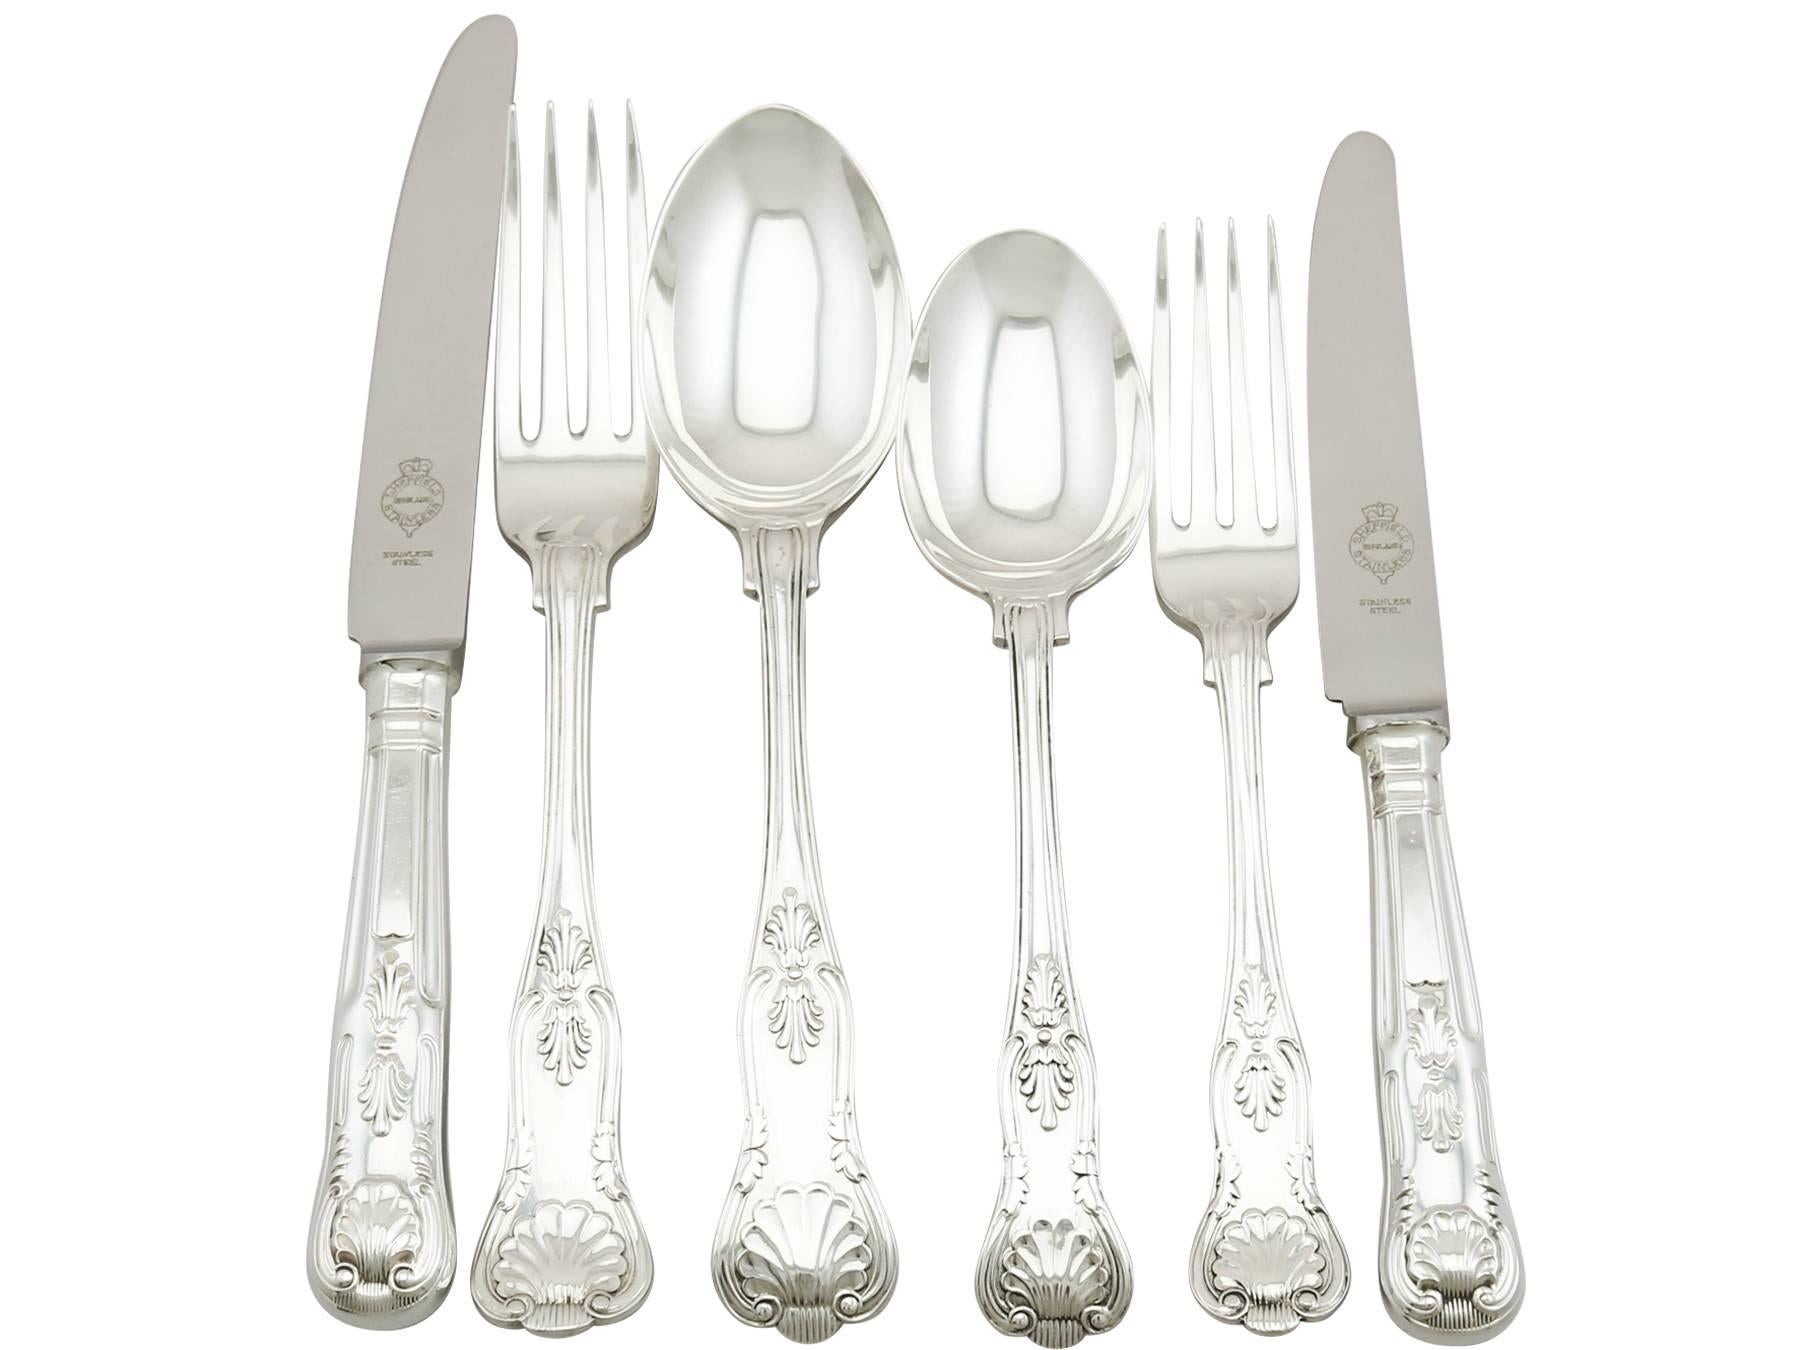 A fine and impressive antique Edwardian English straight sterling silver King's pattern flatware service for six persons; an addition to our canteen of cutlery collection

The pieces of this fine, antique Edwardian sterling silver straight